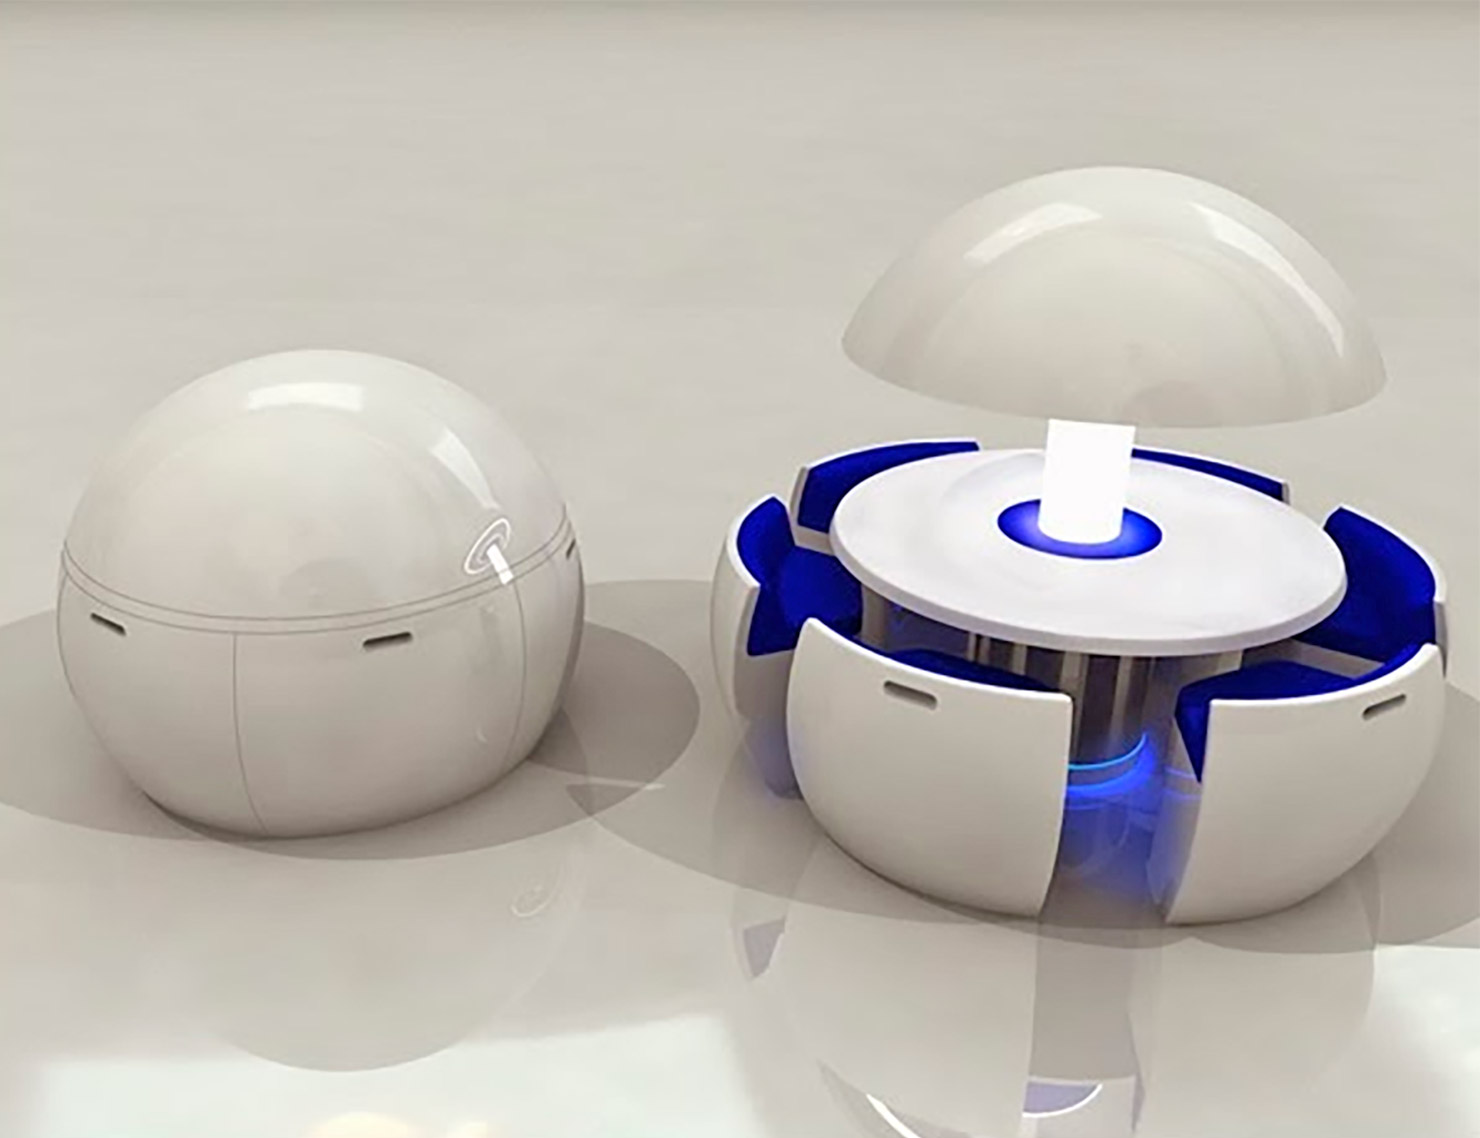 White colored Kure Futuristic Dining Table Turns Into an Egg on a white surface